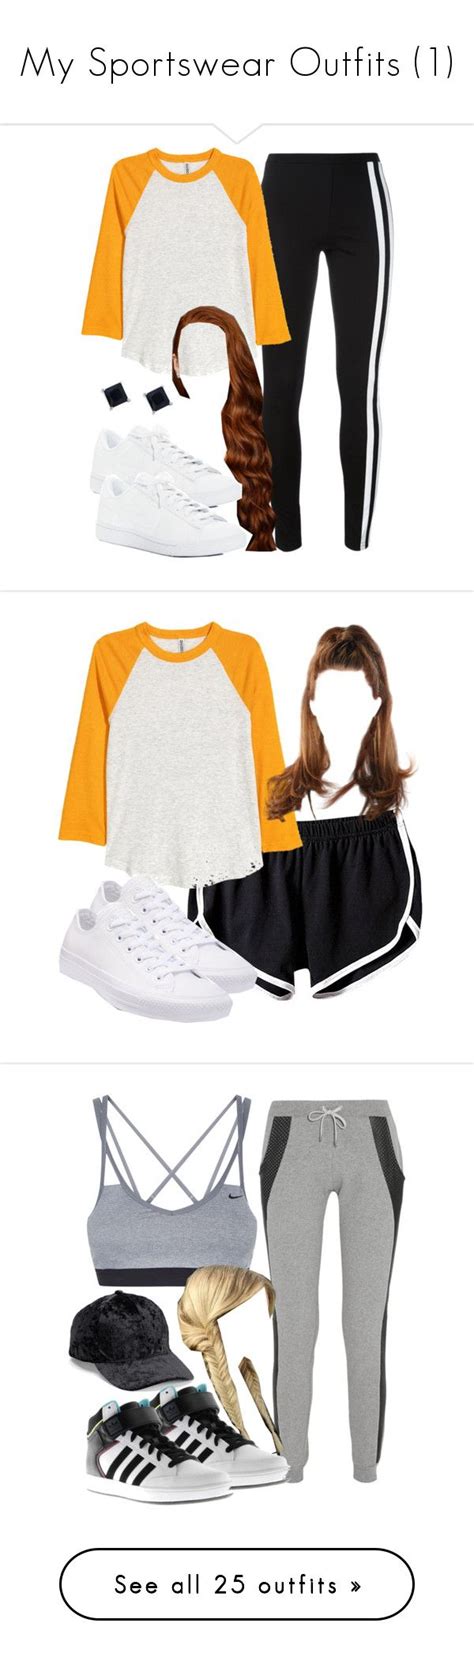 My Sportswear Outfits By Demiwitch Of Mischief Liked On Polyvore